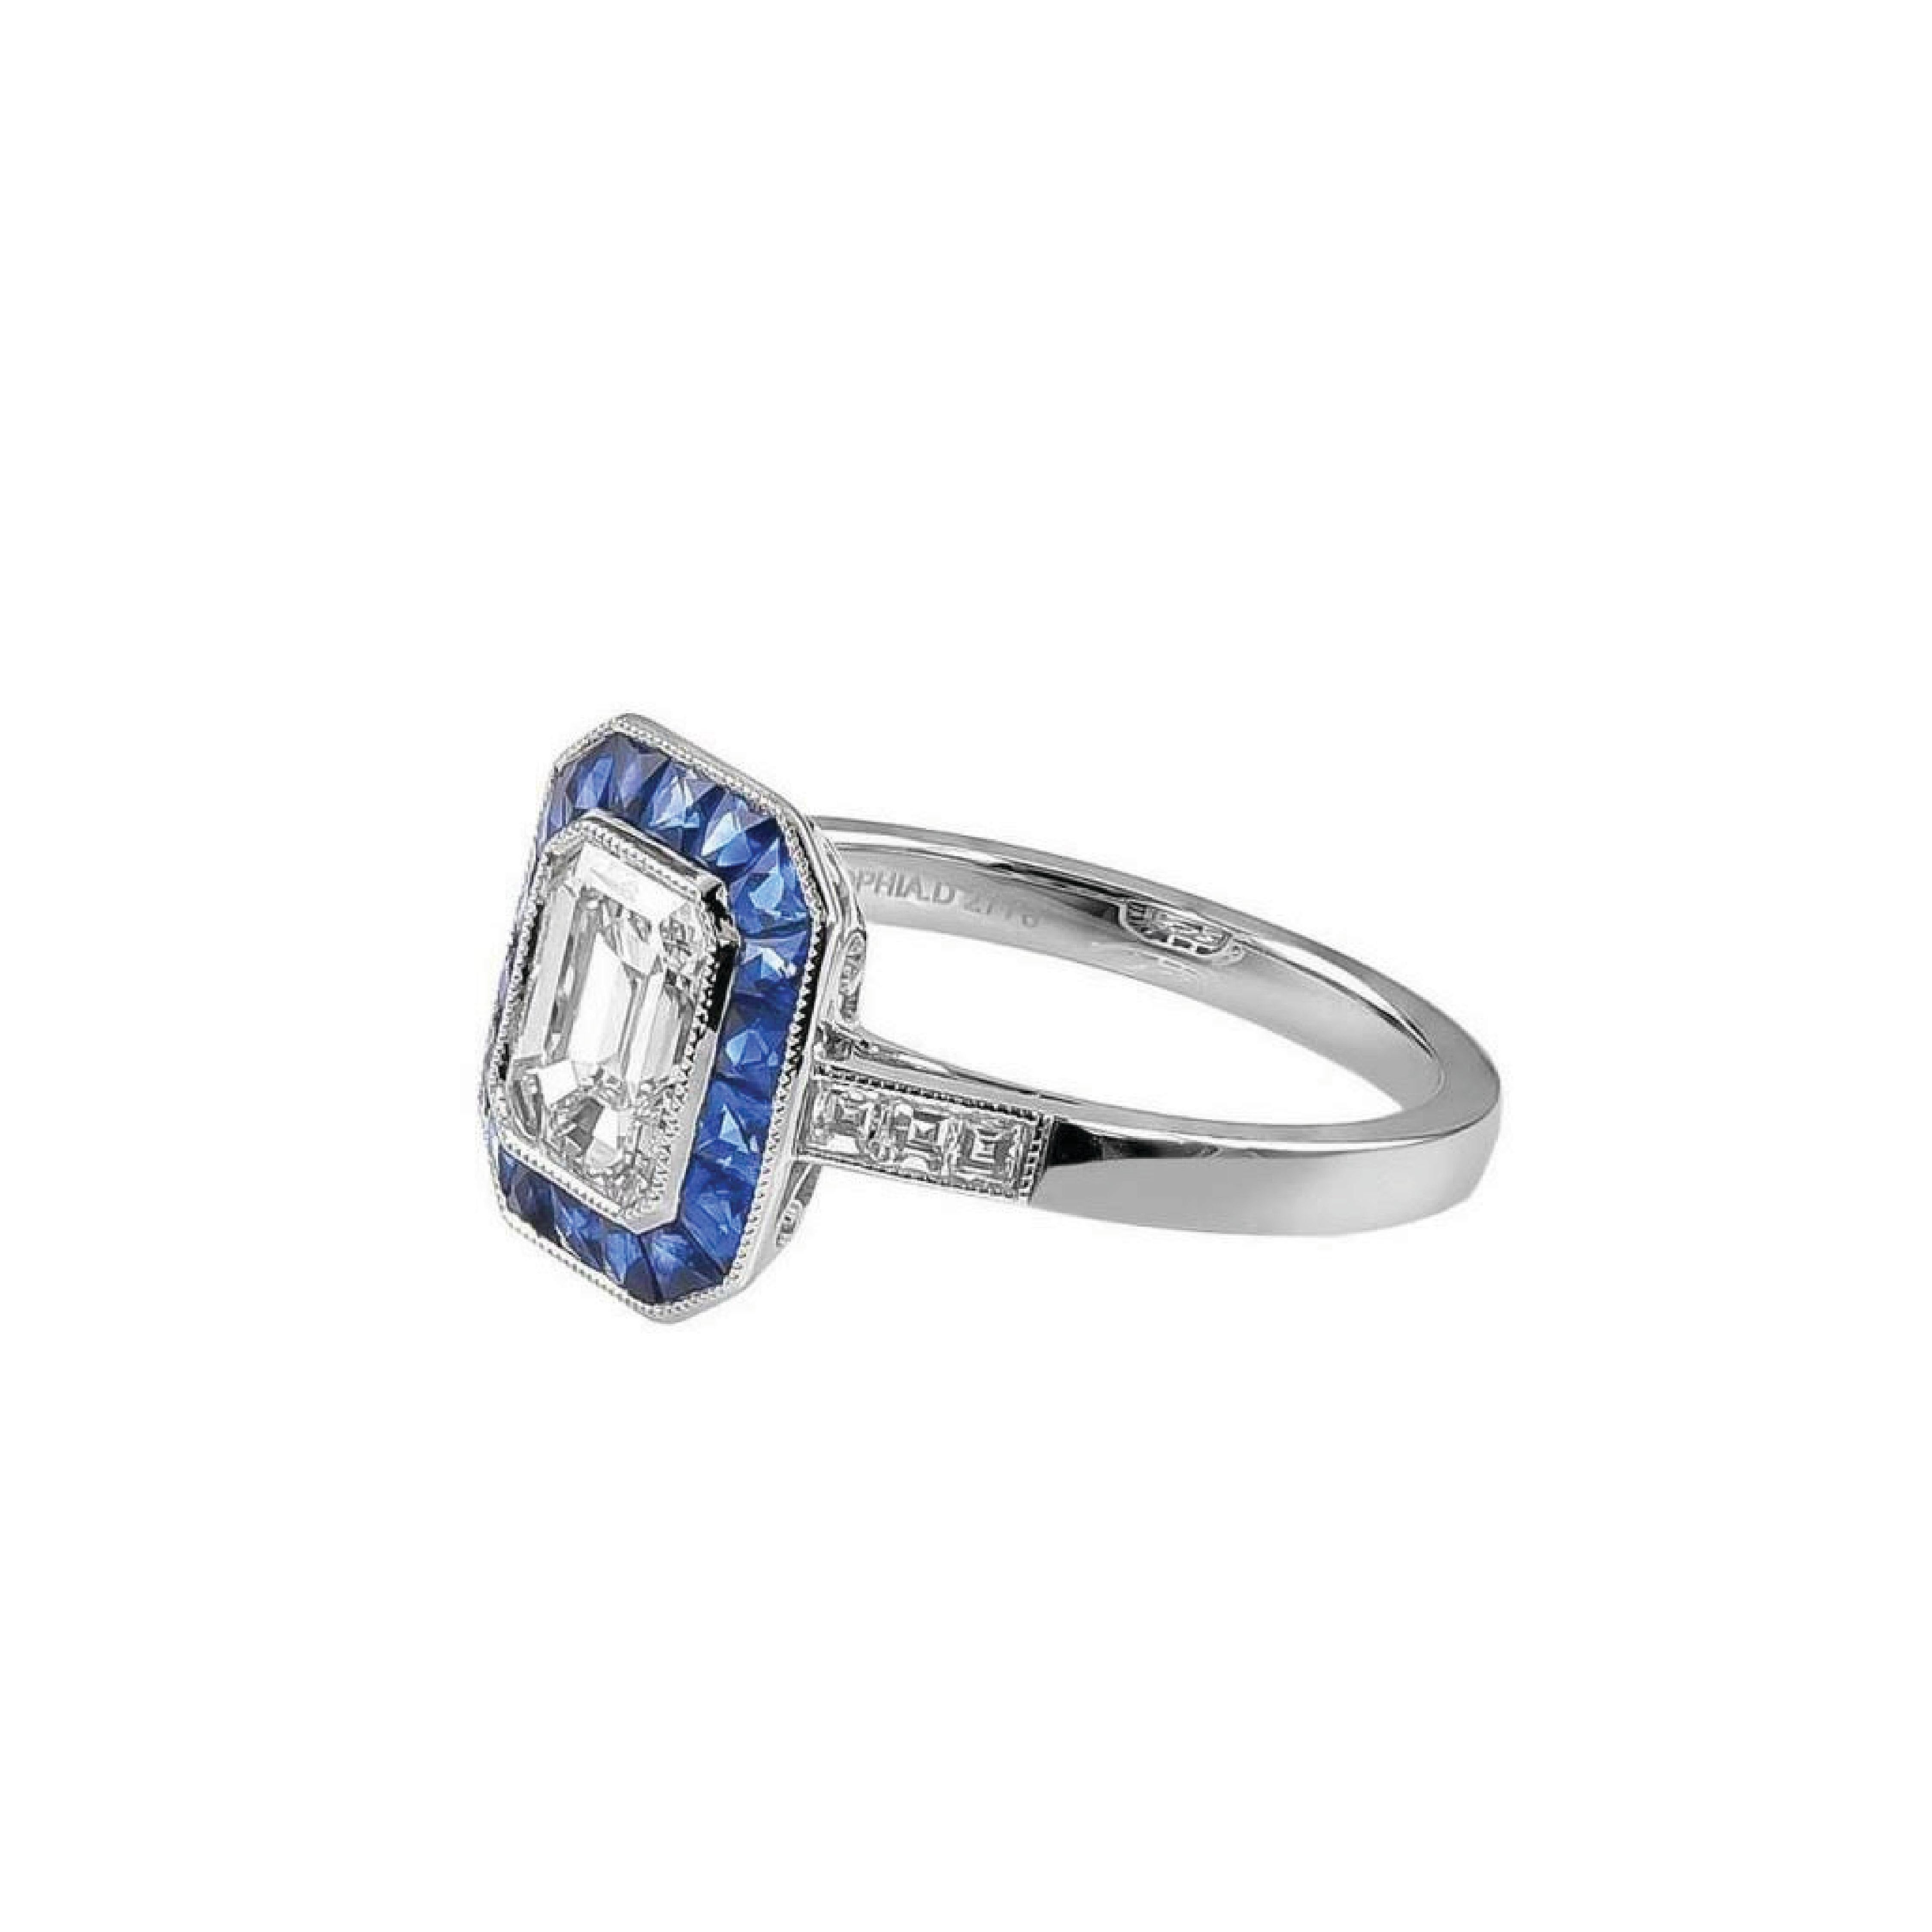 This undeniably elegant styled ring composed of GIA certified Emerald Cut Diamonds that weighs 1.03 carats and has a color and clarity of D-VVS2, with French Cut Sapphire 0.70 carats, surrounded by Small Diamonds weighing 0.24 carats.